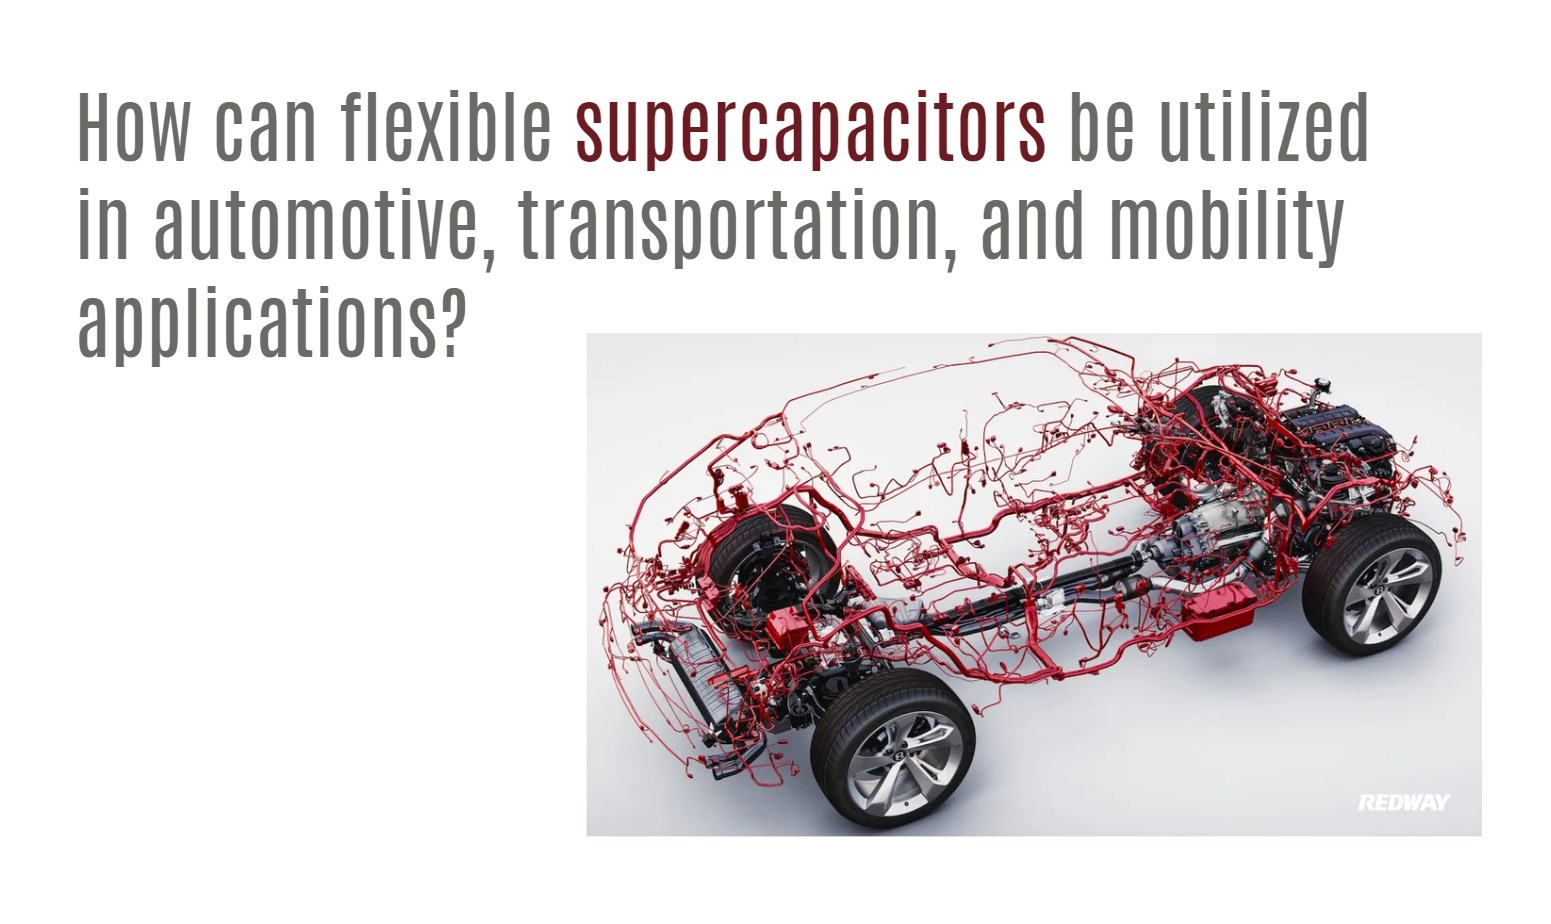 How can flexible supercapacitors be utilized in automotive, transportation, and mobility applications?